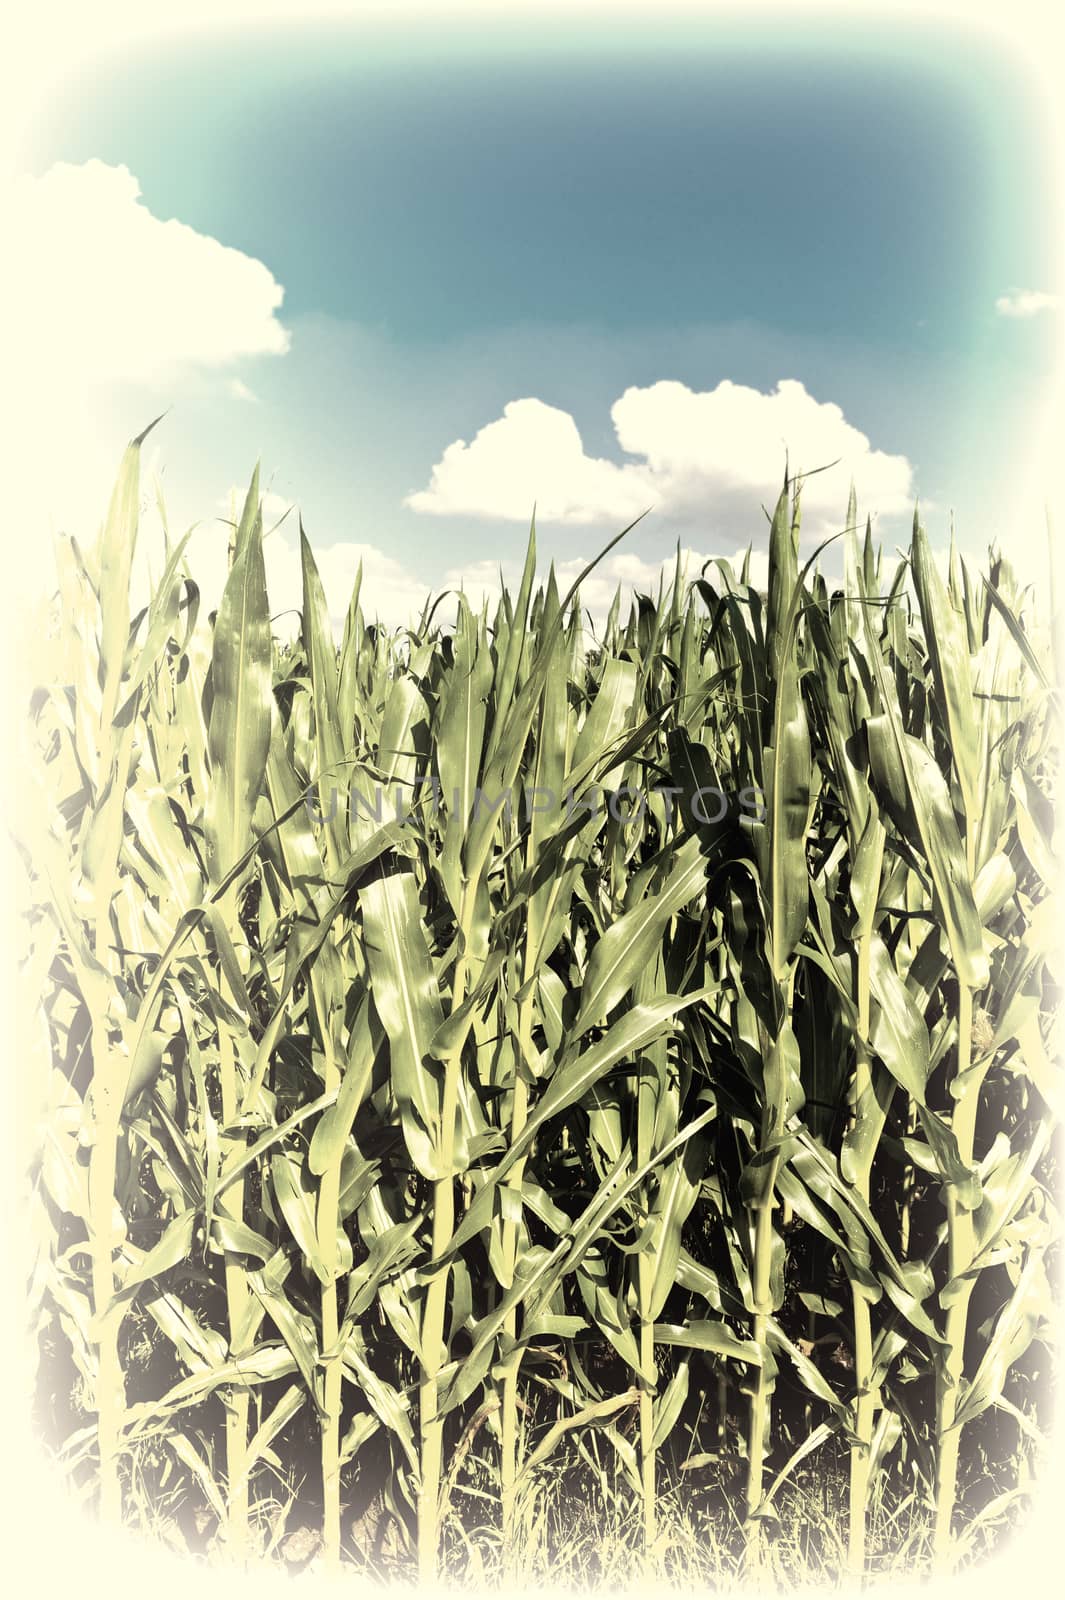 Plantation of Corn in Southern Bavaria, Germany, Retro Image Filtered Style 